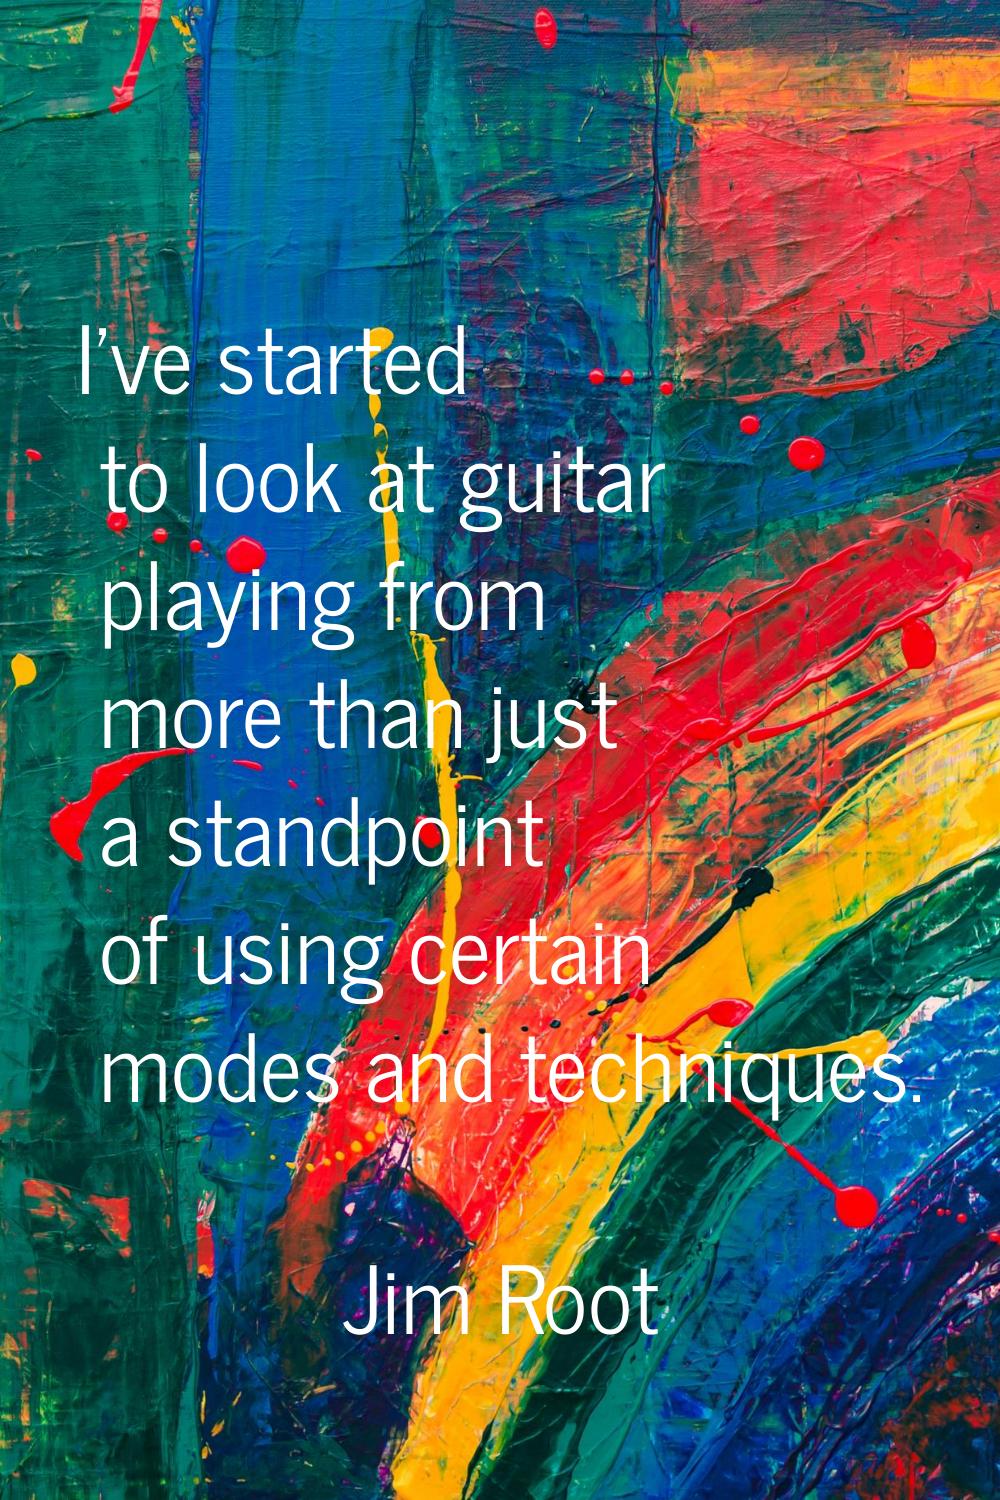 I've started to look at guitar playing from more than just a standpoint of using certain modes and 